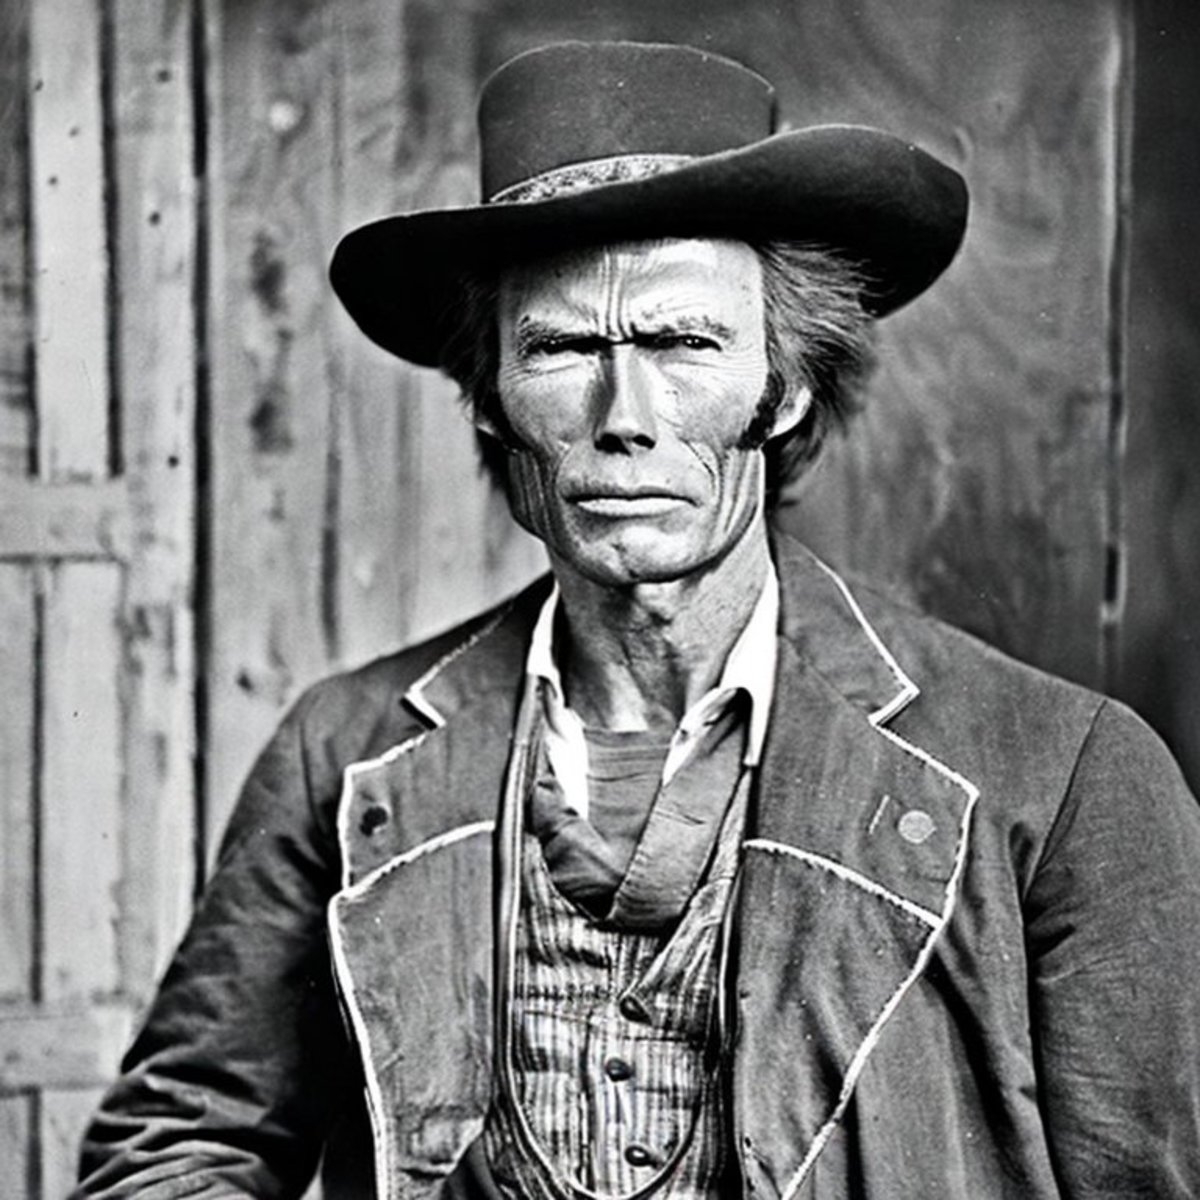 AI image, old photo of Clint Eastwood dressed as a cowboy.